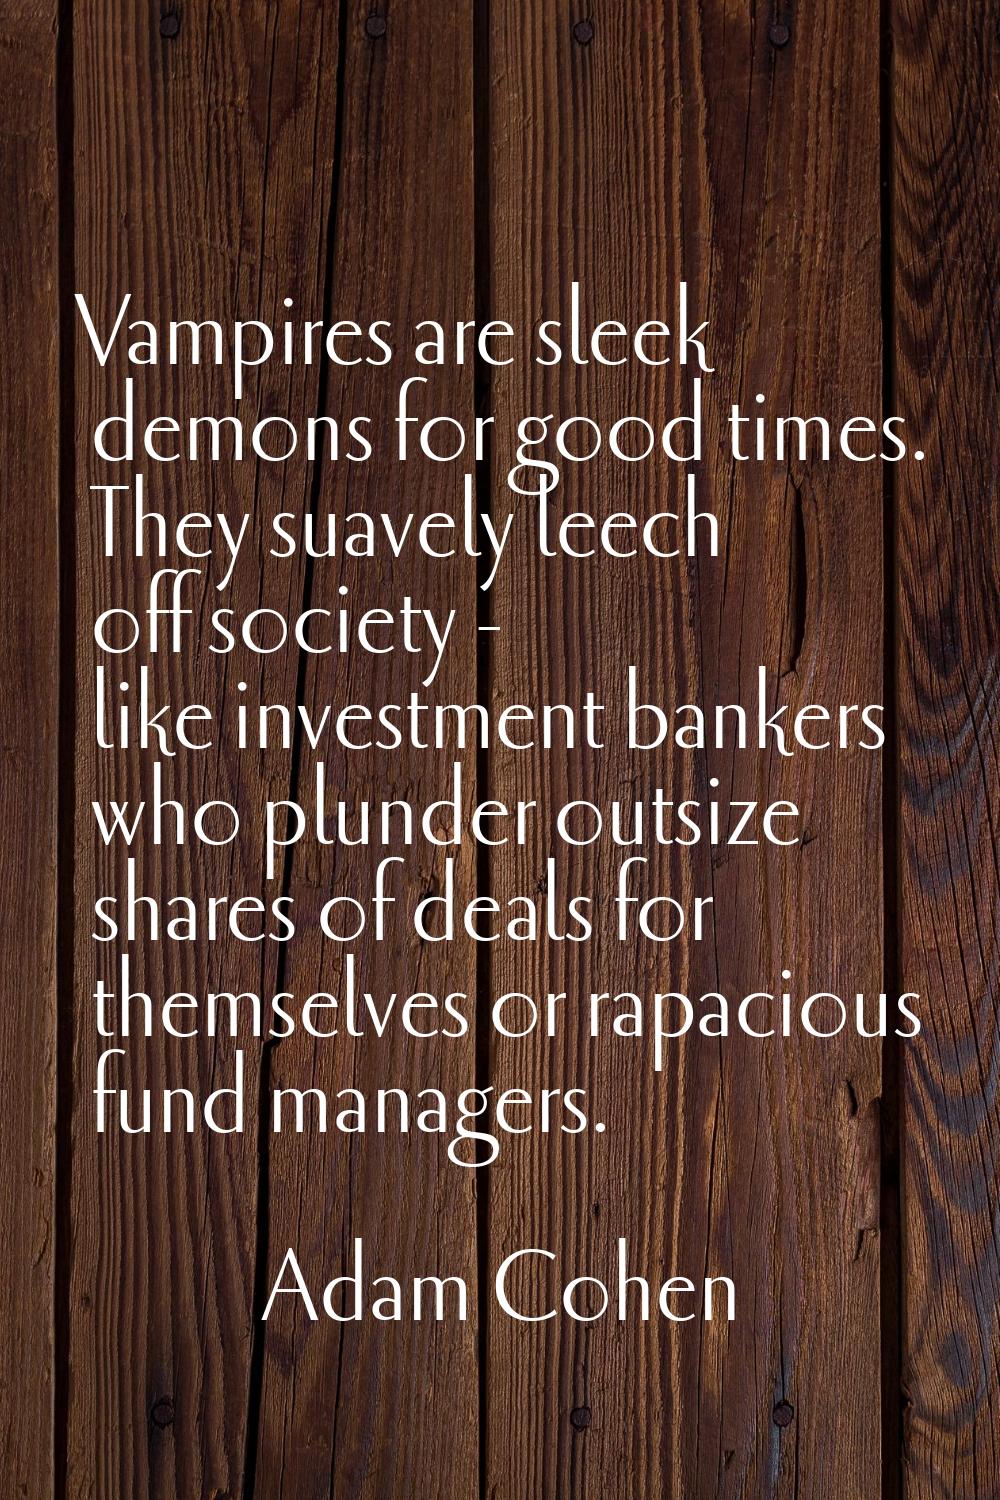 Vampires are sleek demons for good times. They suavely leech off society - like investment bankers 